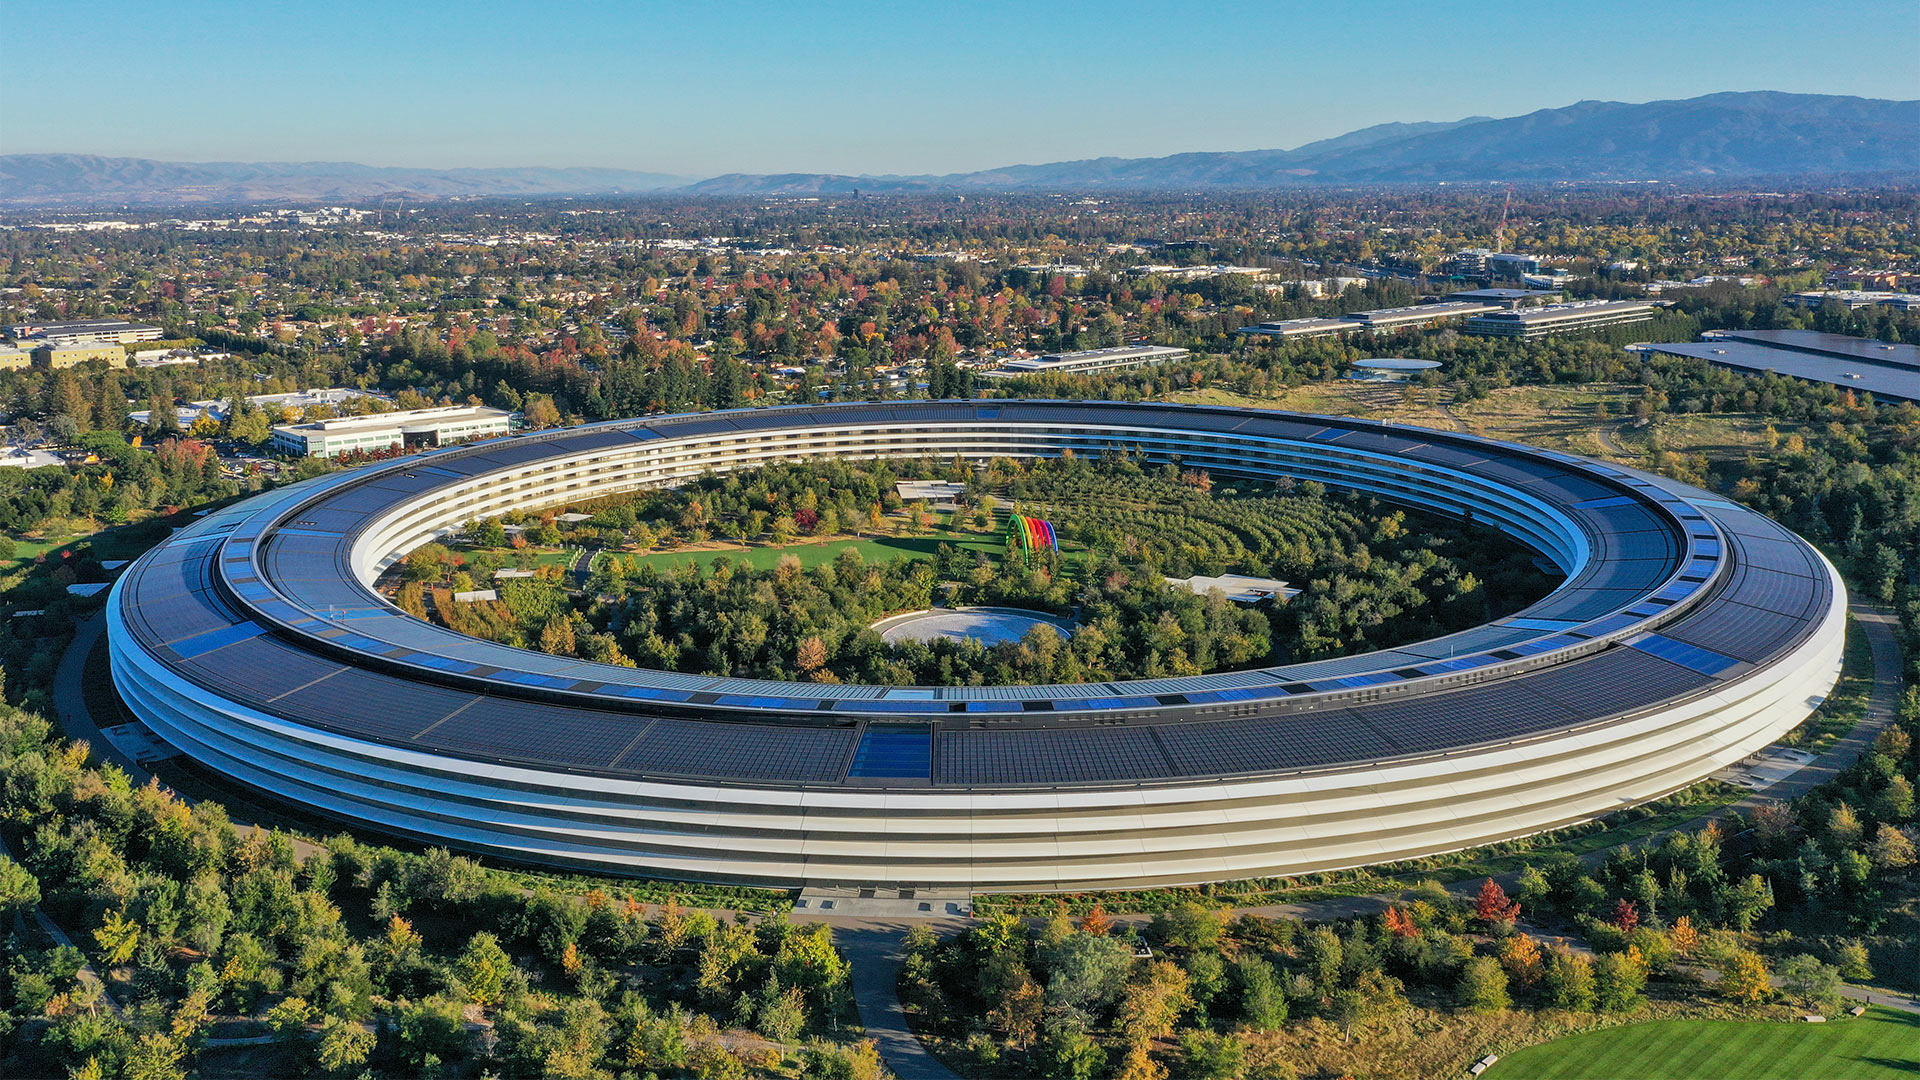 Apple Park Cupertino | picture alliance / AA